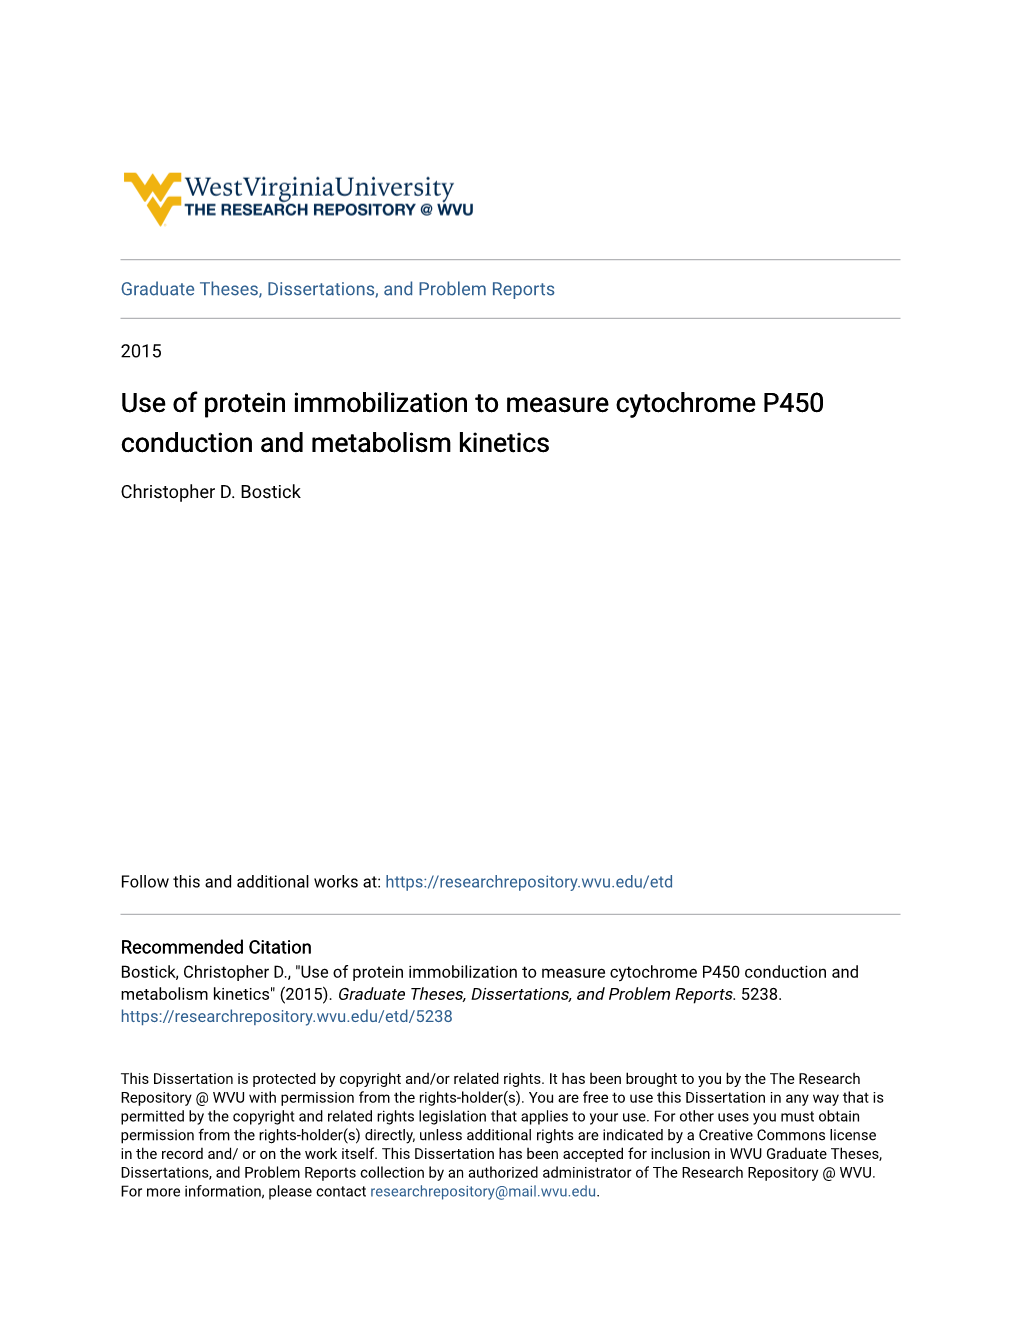 Use of Protein Immobilization to Measure Cytochrome P450 Conduction and Metabolism Kinetics